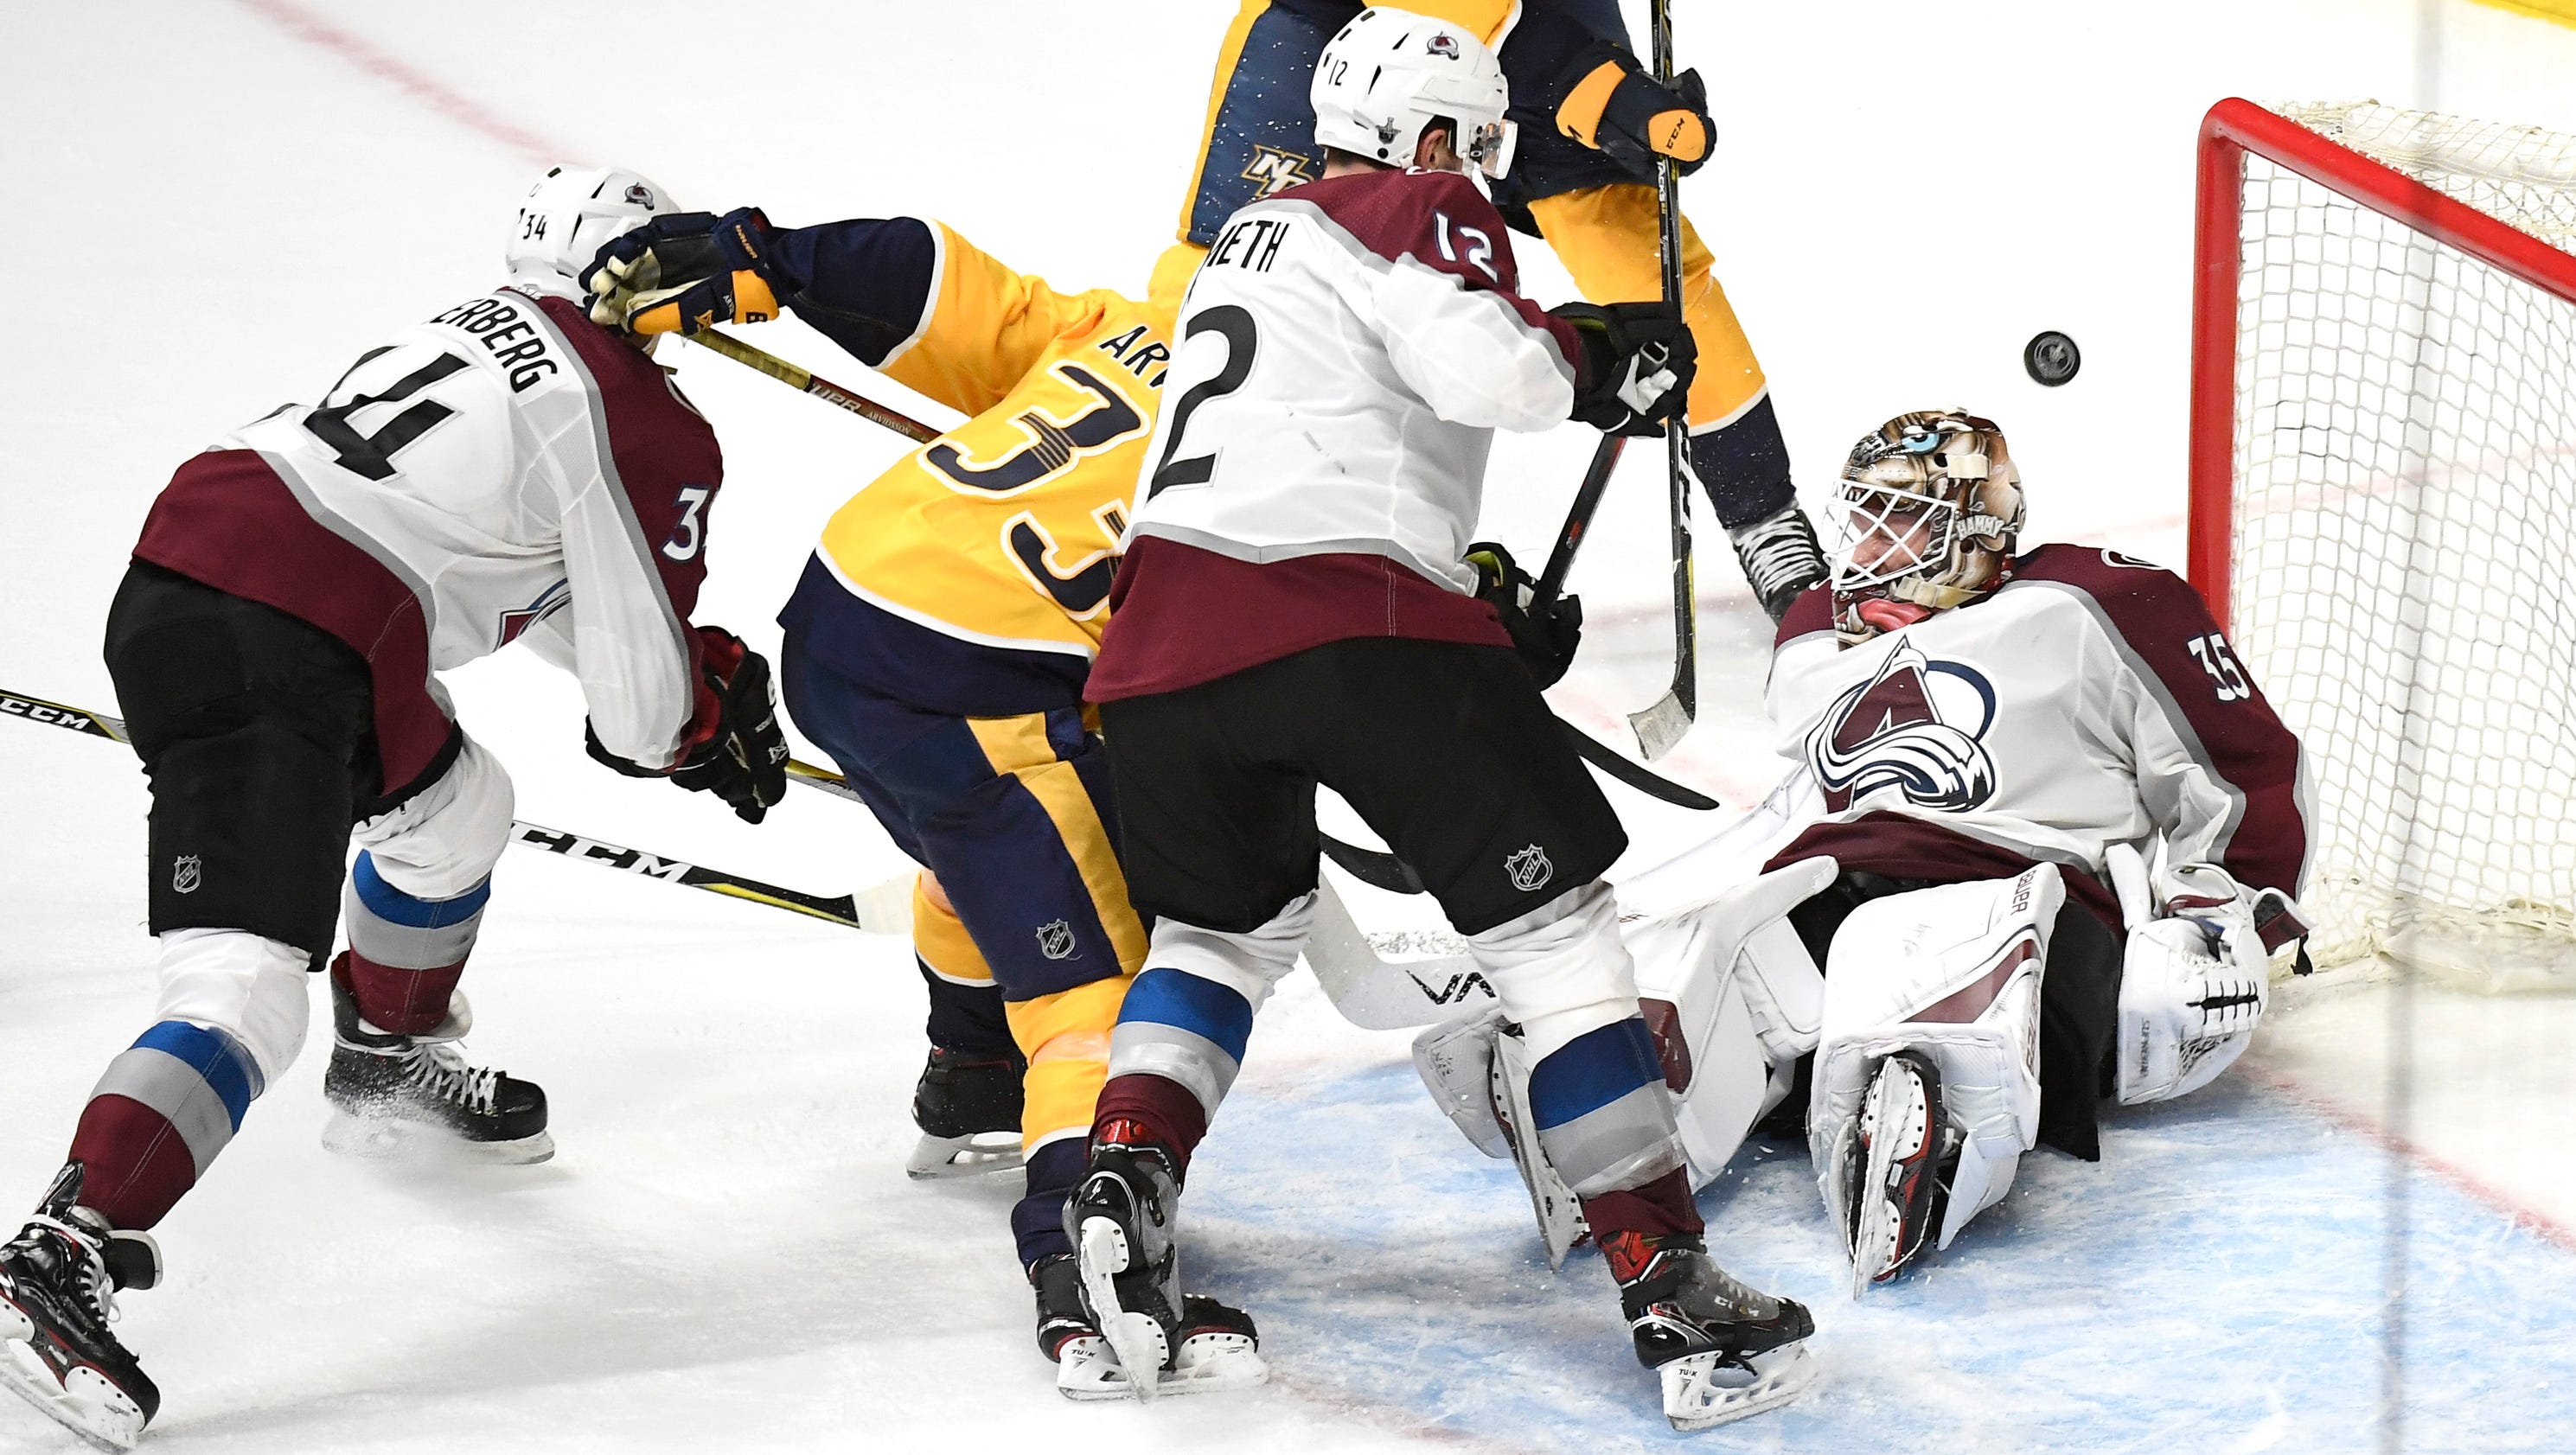 Predators vs. Avalanche: 3 things to watch in Game 6 of NHL first-round playoff series